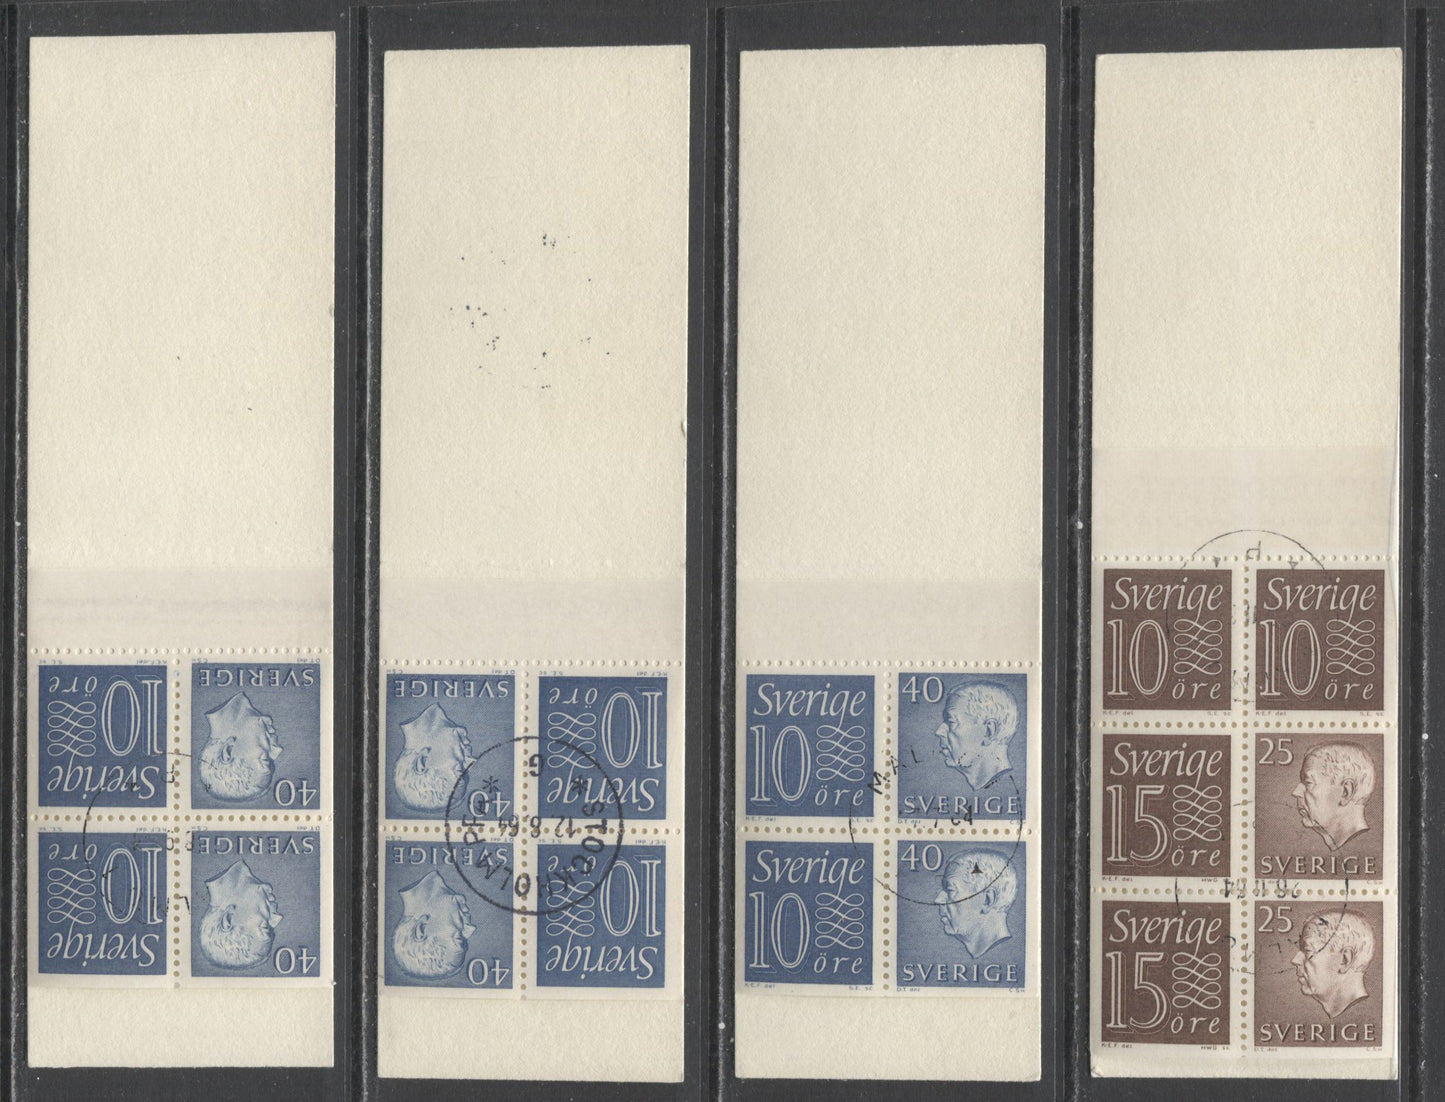 Lot 195 Sweden SC#666a, 669b (Facit #HA12ARV/HA13BRV) 1964 Re-Engraved King Gustav VI Adolf Definitive Issue, Upright and Inverted Panes, 10 Ore Stamps At Left And Right, CDS Cancelled, 4 VF Used CTO Booklets of 10 (2 x 5), Estimated Value $30